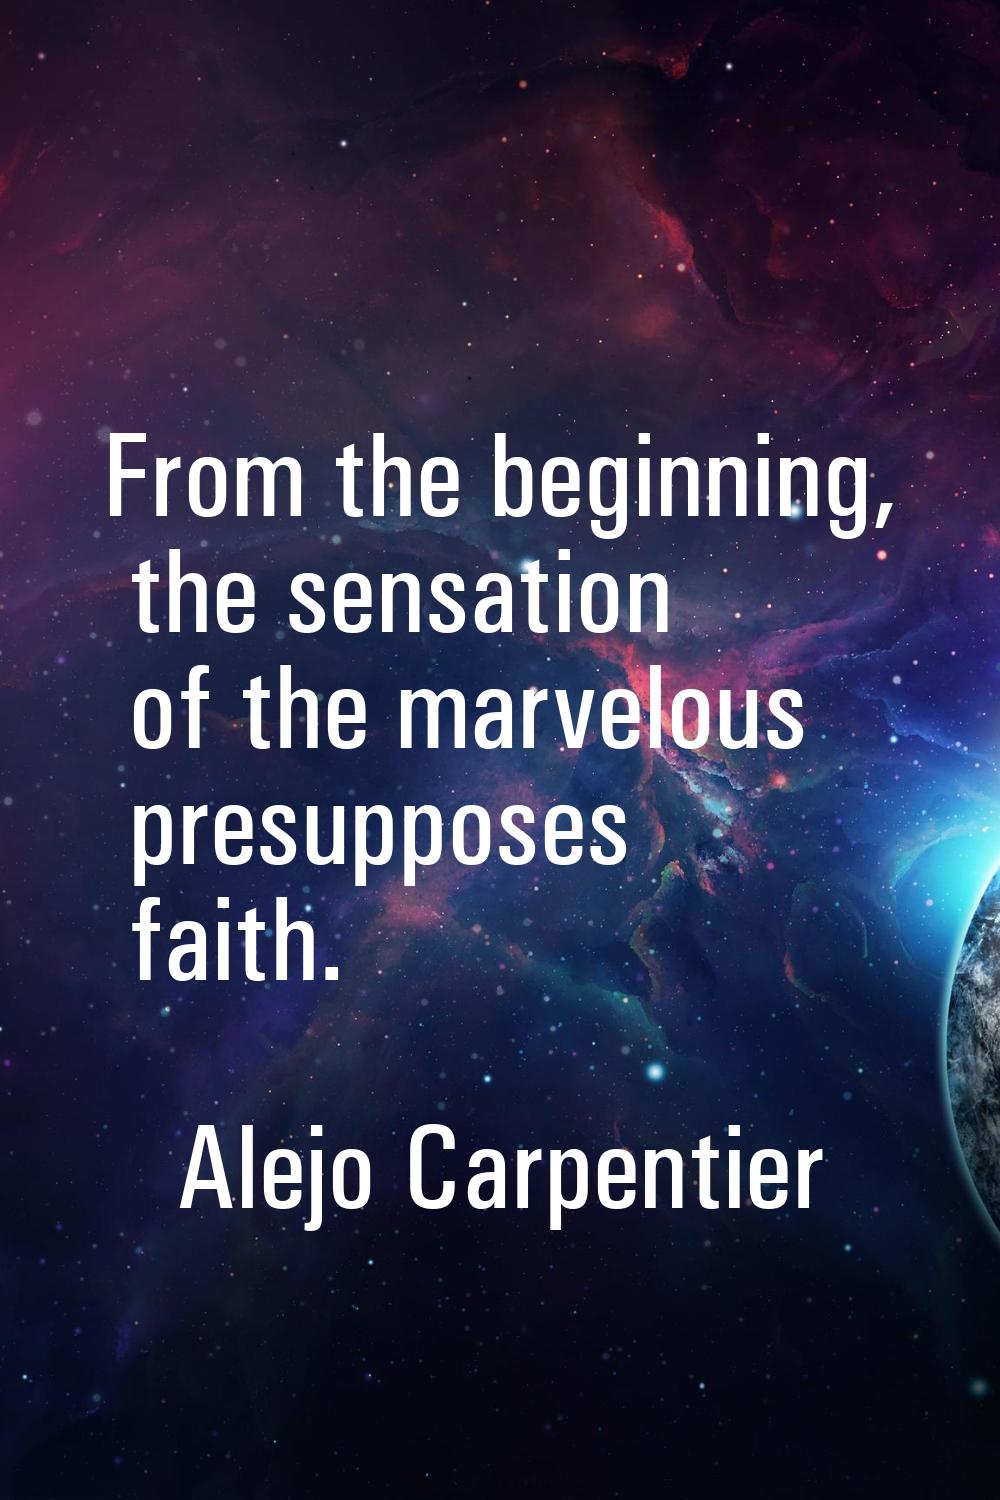 From the beginning, the sensation of the marvelous presupposes faith.